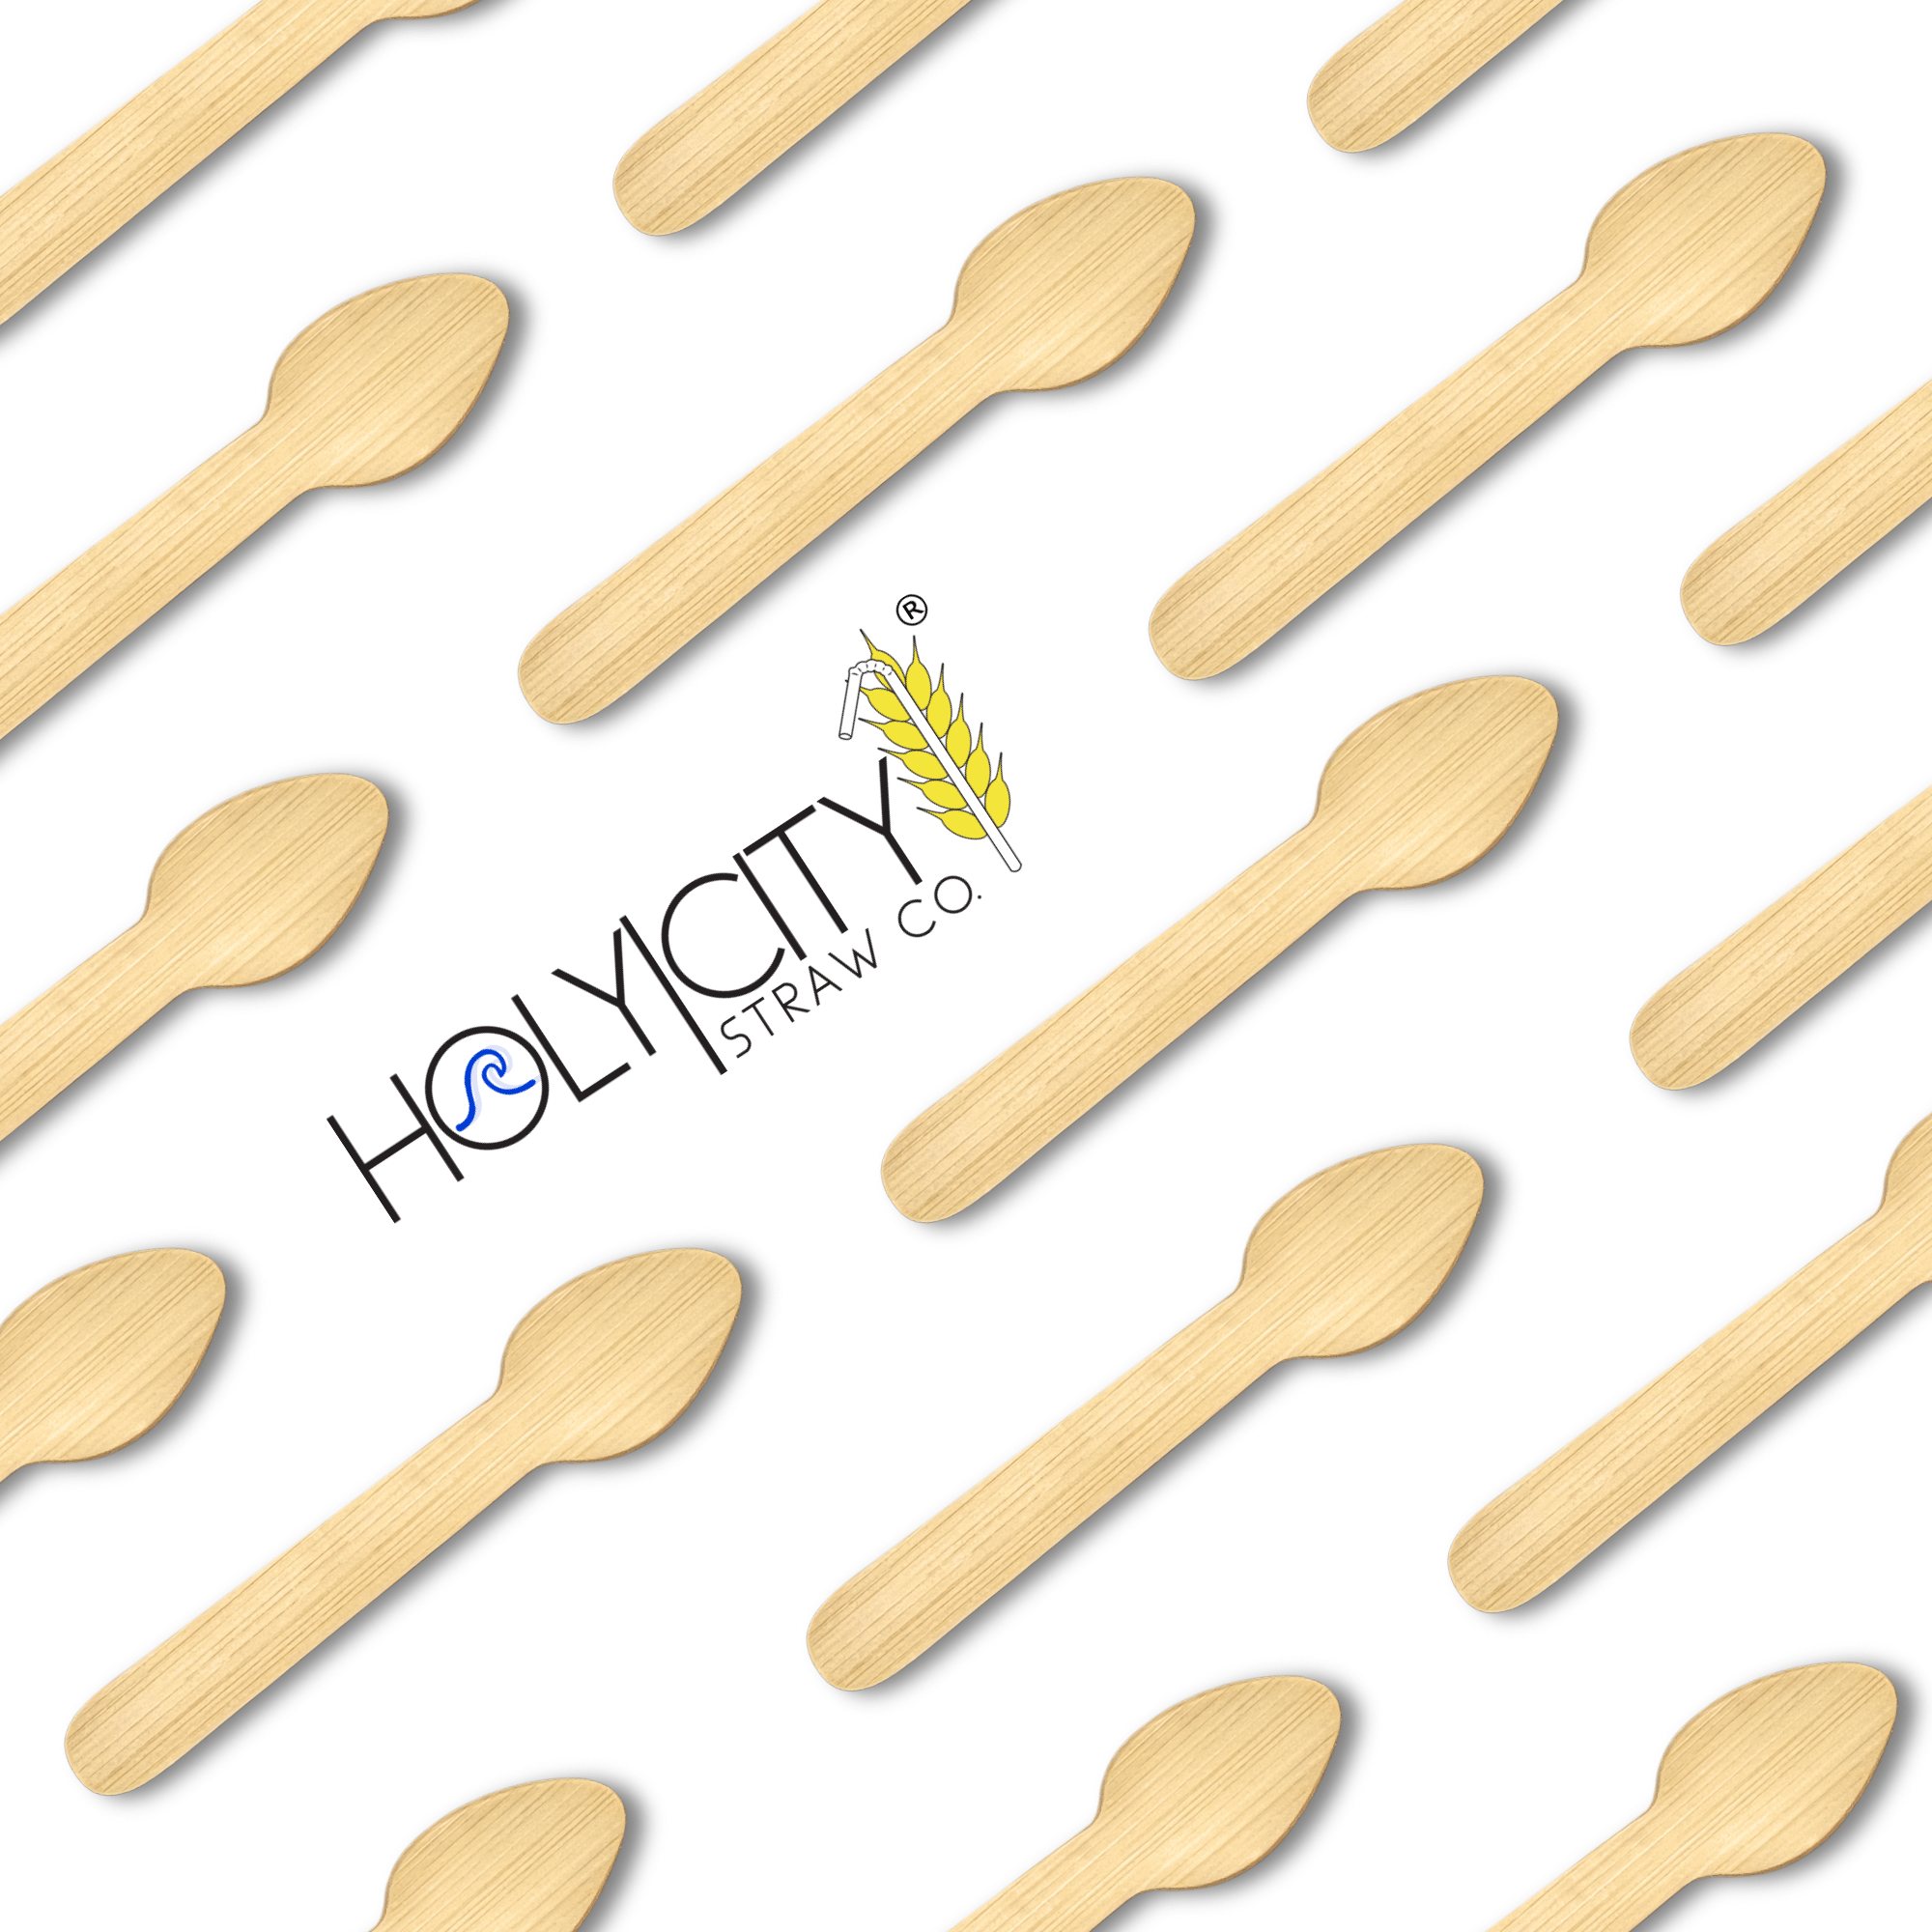 Holy City Straw Co. bamboo mini taster spoons lined up on angle